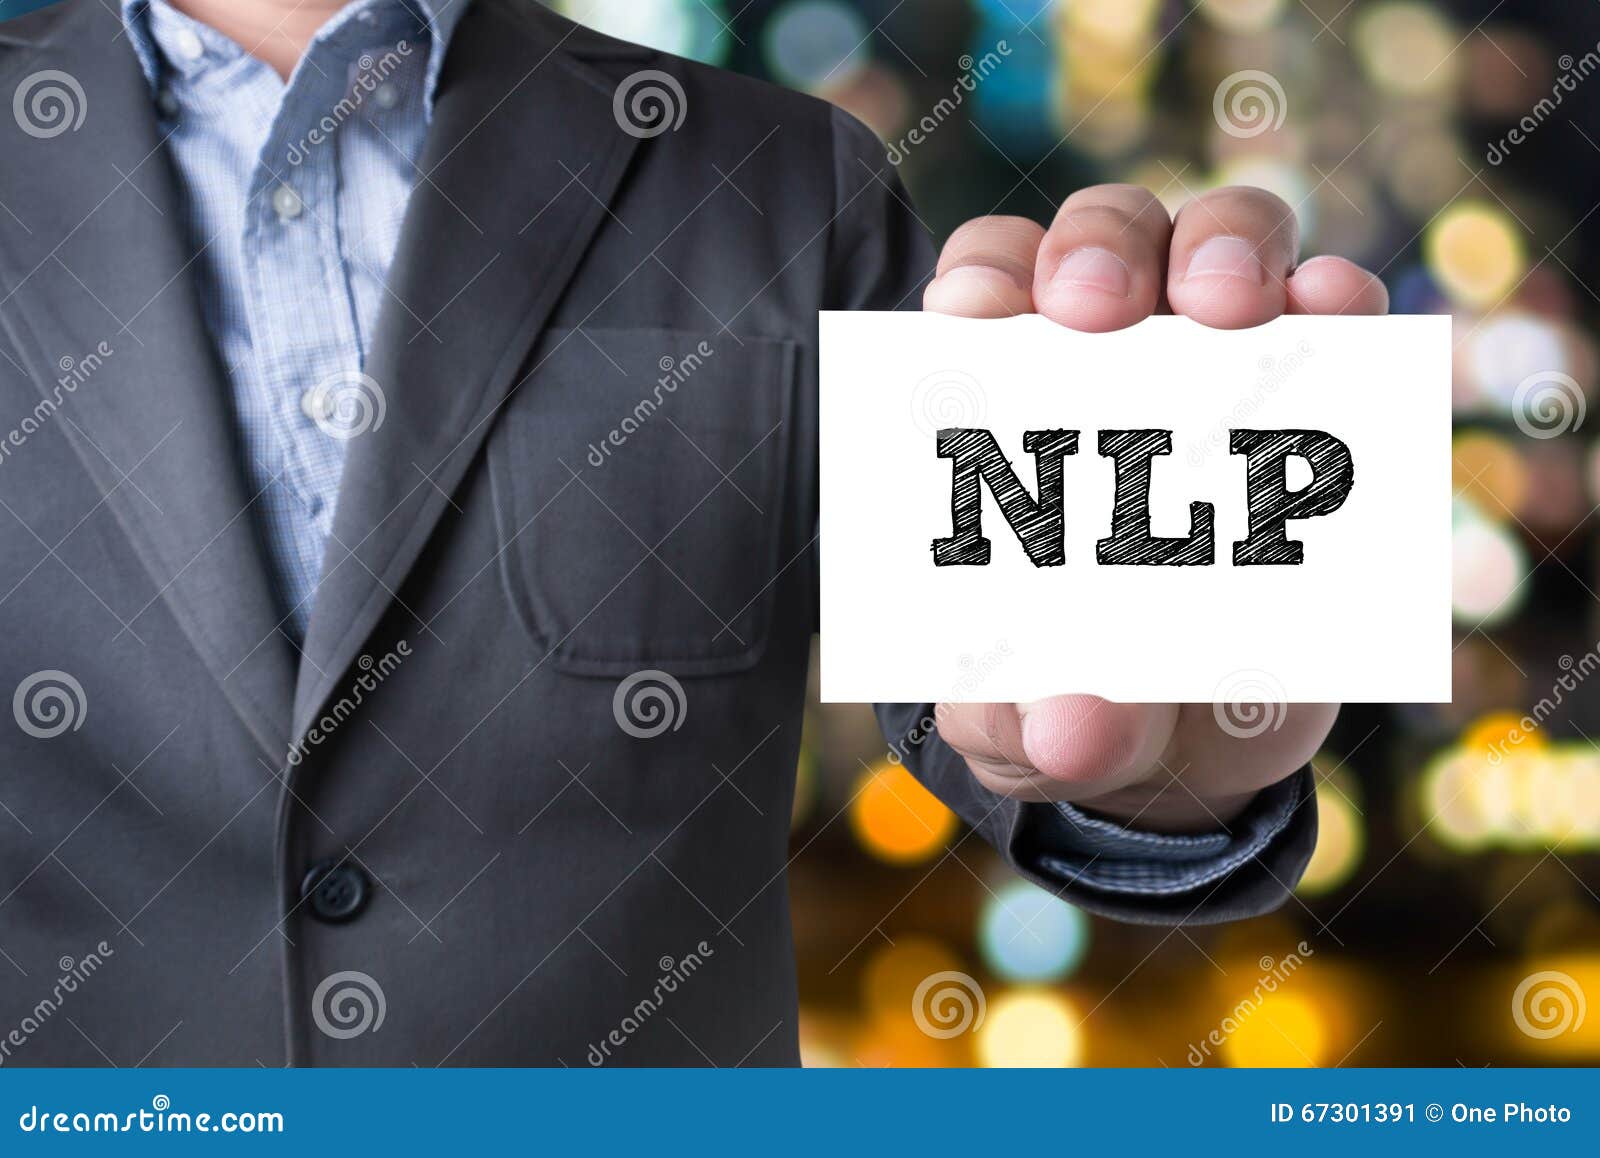 nlp letters (or neuro linguistic programming) on the card shown